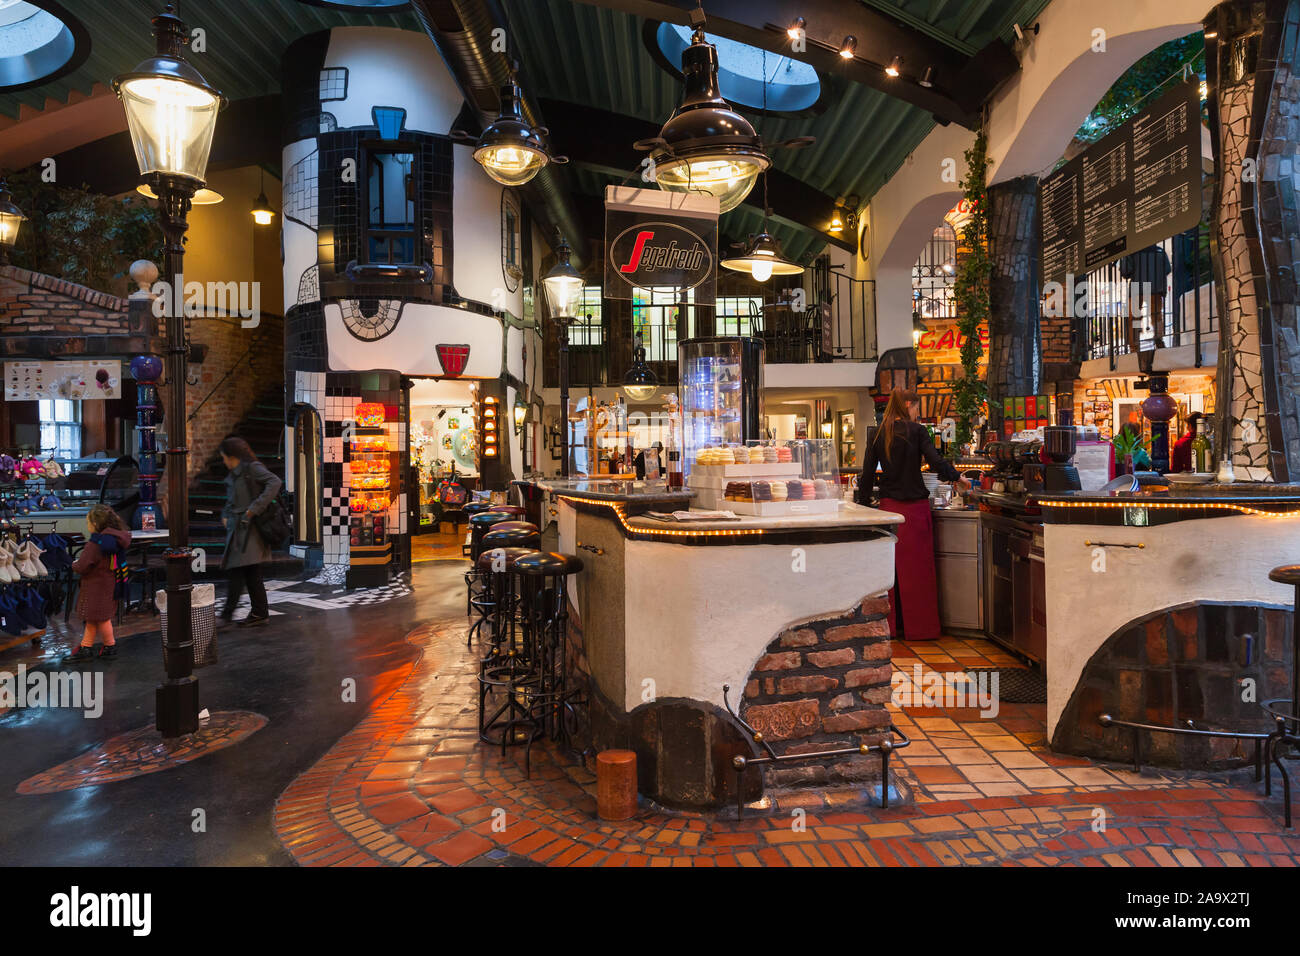 Vienna, Austria - November 1, 2015: The Hundertwasser Village cafe area was built both on the inside and the exterior by concepts of Friedensreich Hun Stock Photo